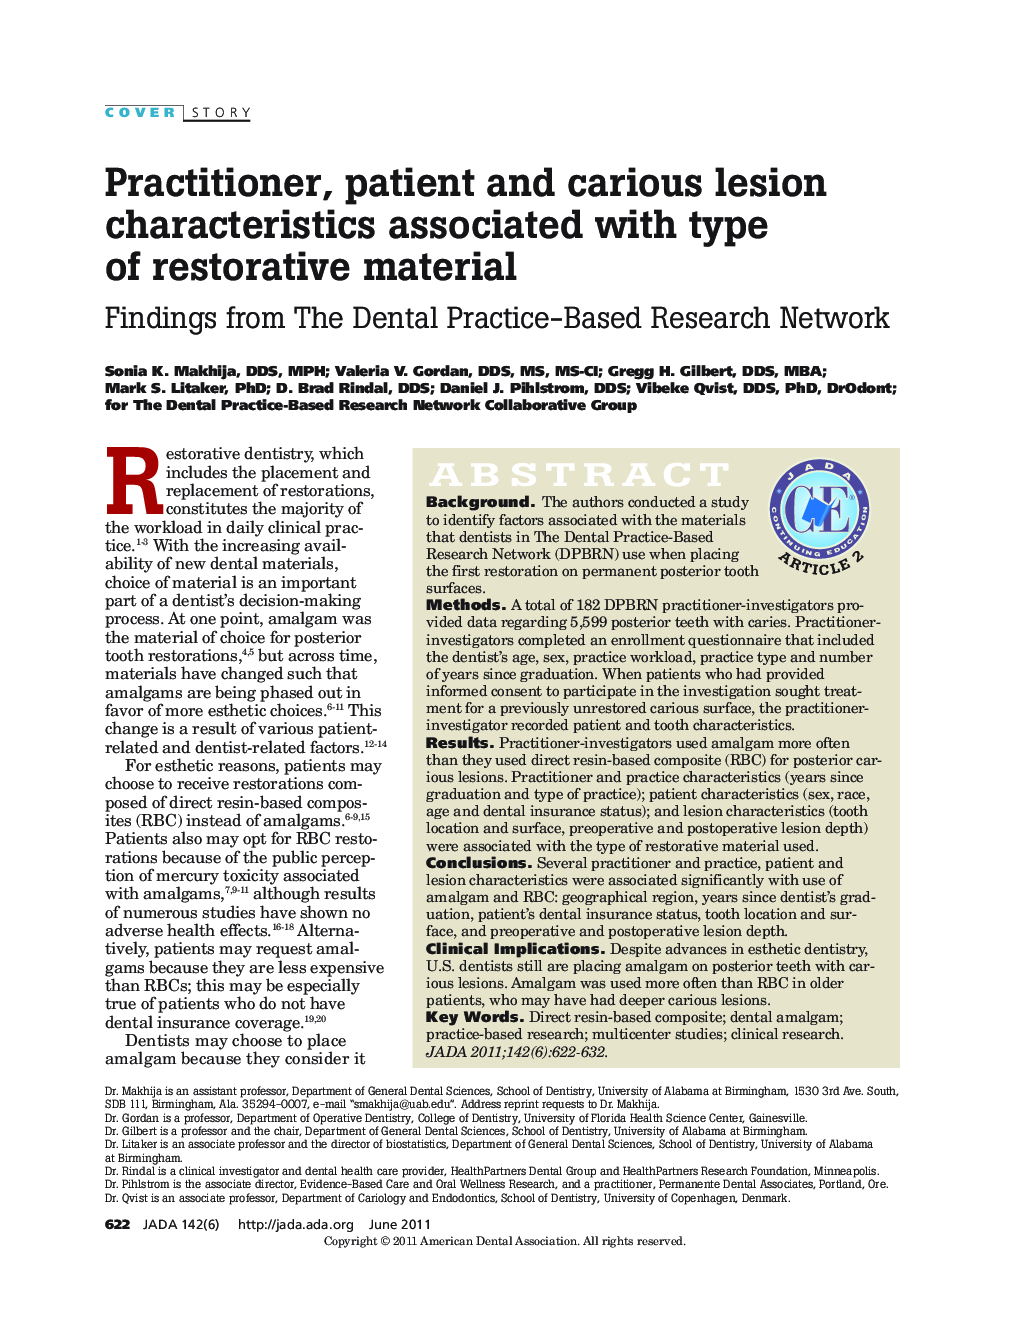 Practitioner, patient and carious lesion characteristics associated with type of restorative material : Findings from The Dental Practice-Based Research Network